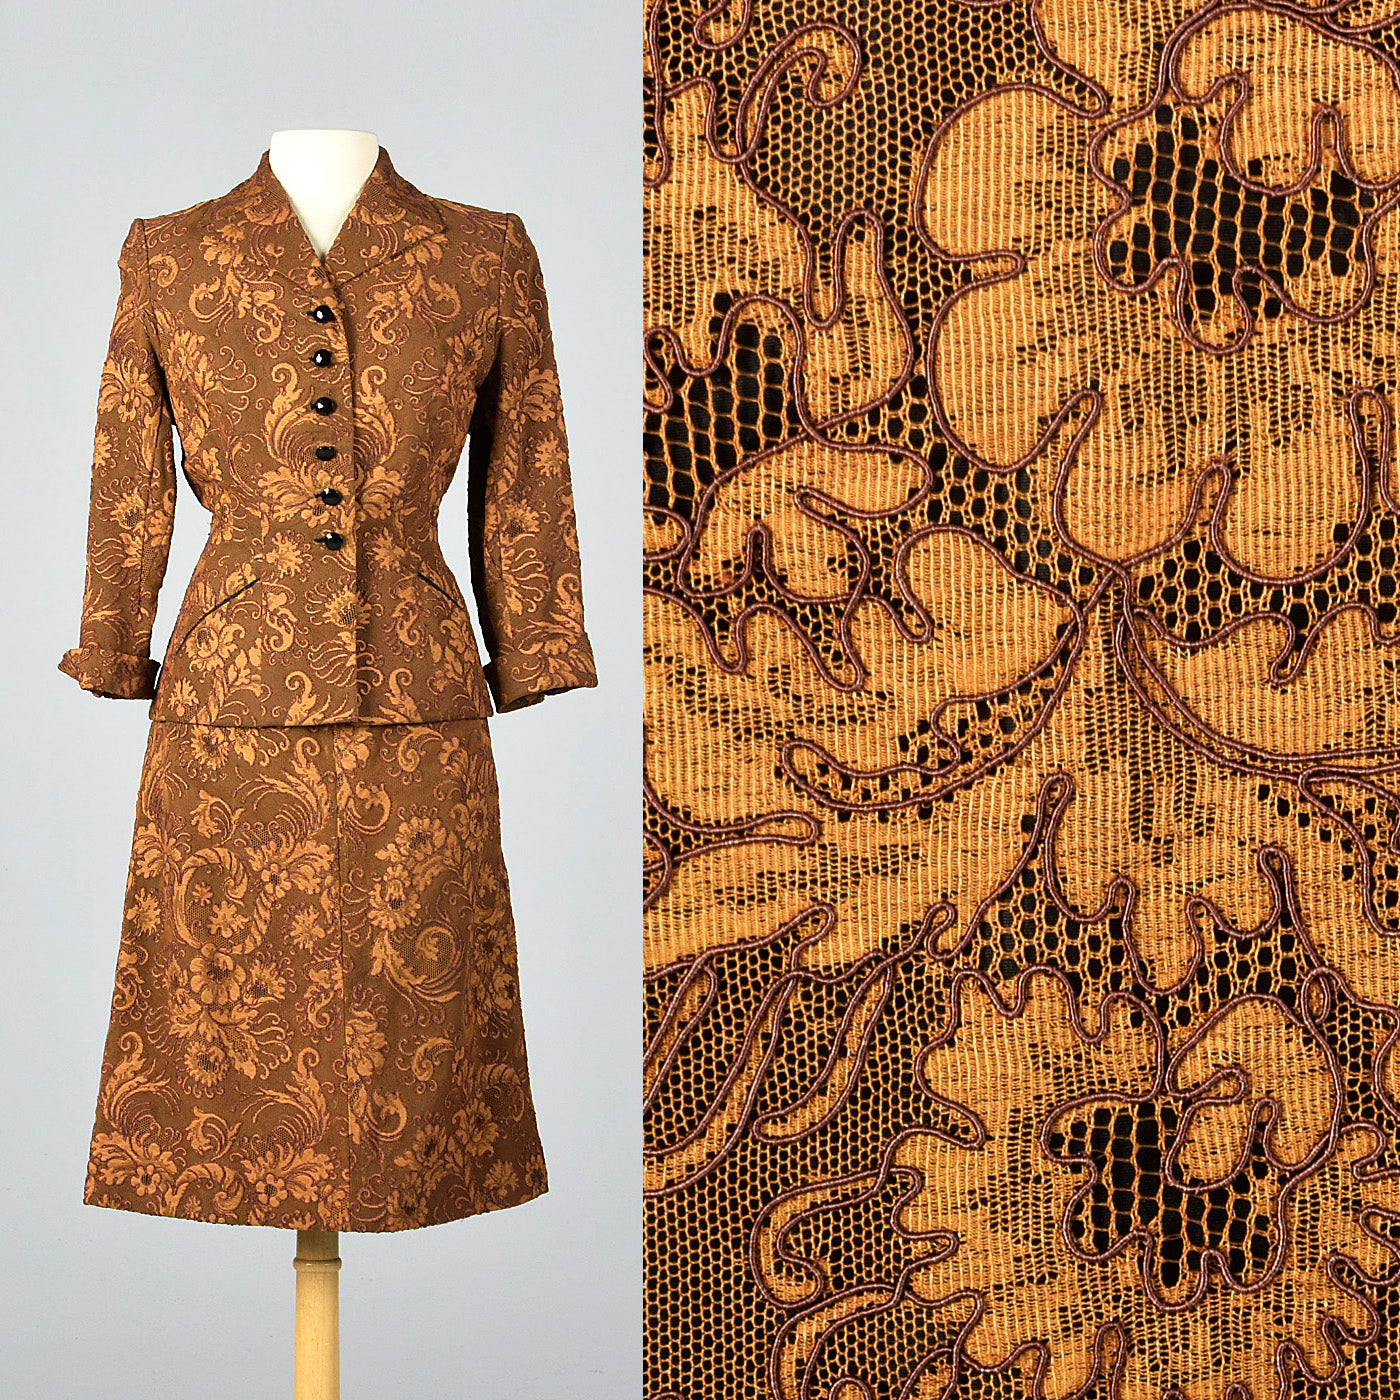 1950s Brown Lace Overlay Skirt Suit